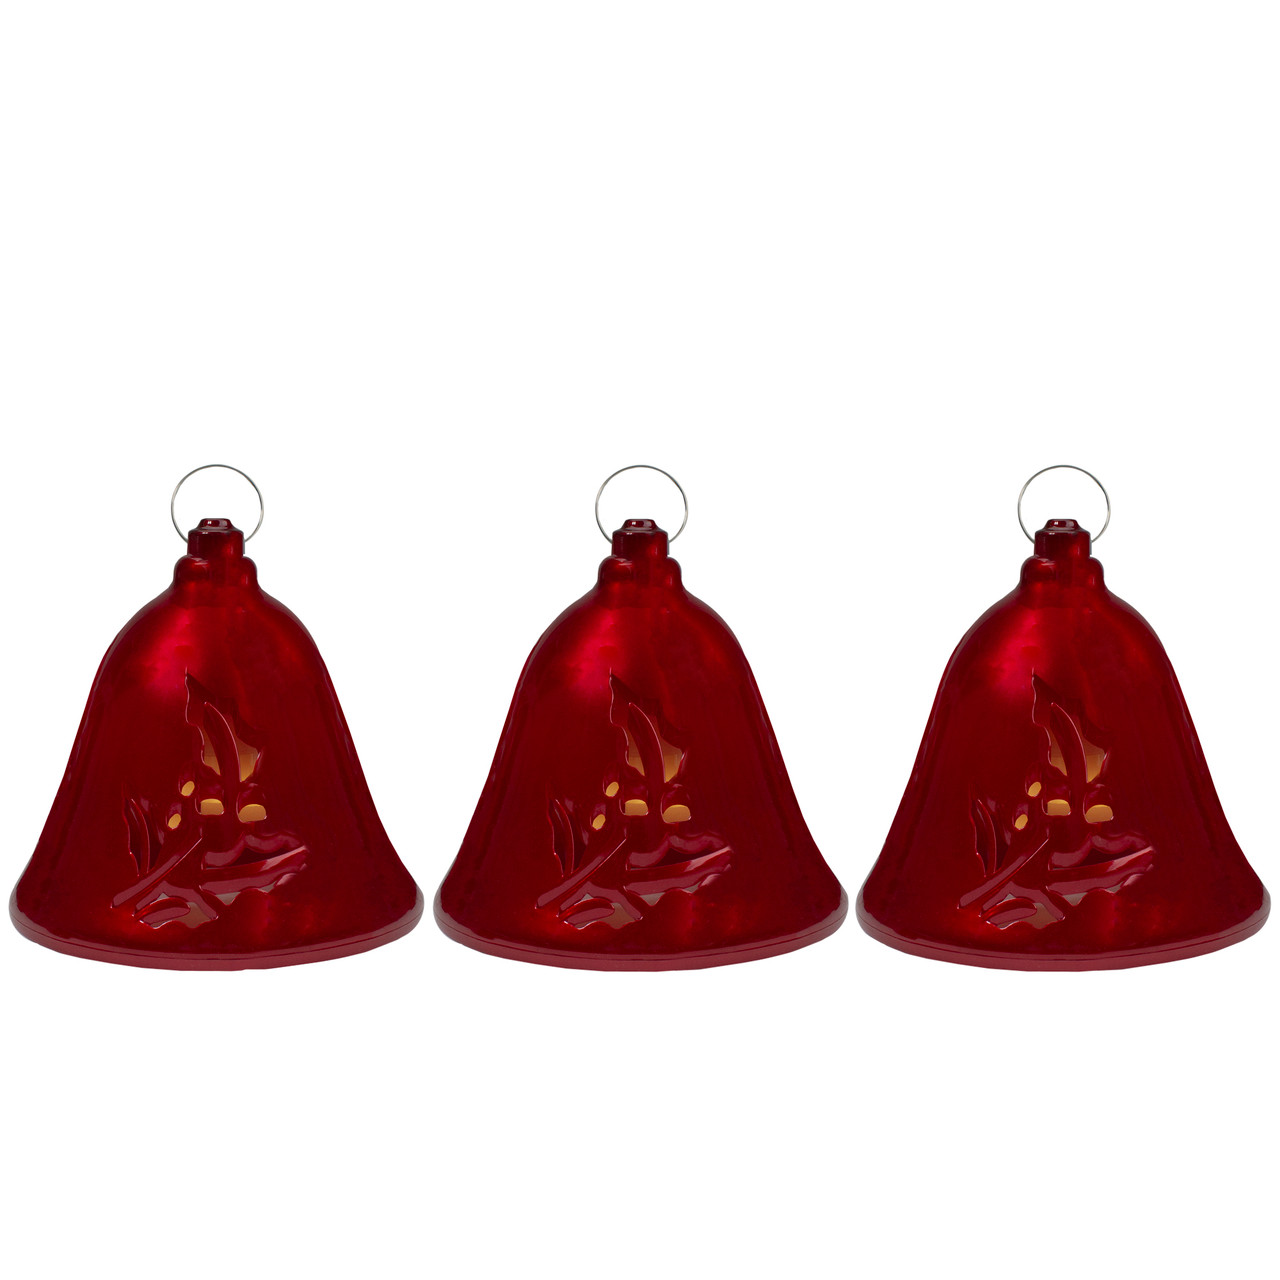 Golden Plastic Decorative Plastic Bells for Home Decor Crafts Artificial  Bells Christmas Hanging Ornaments Jingle Bell 2.5 Inch Size 